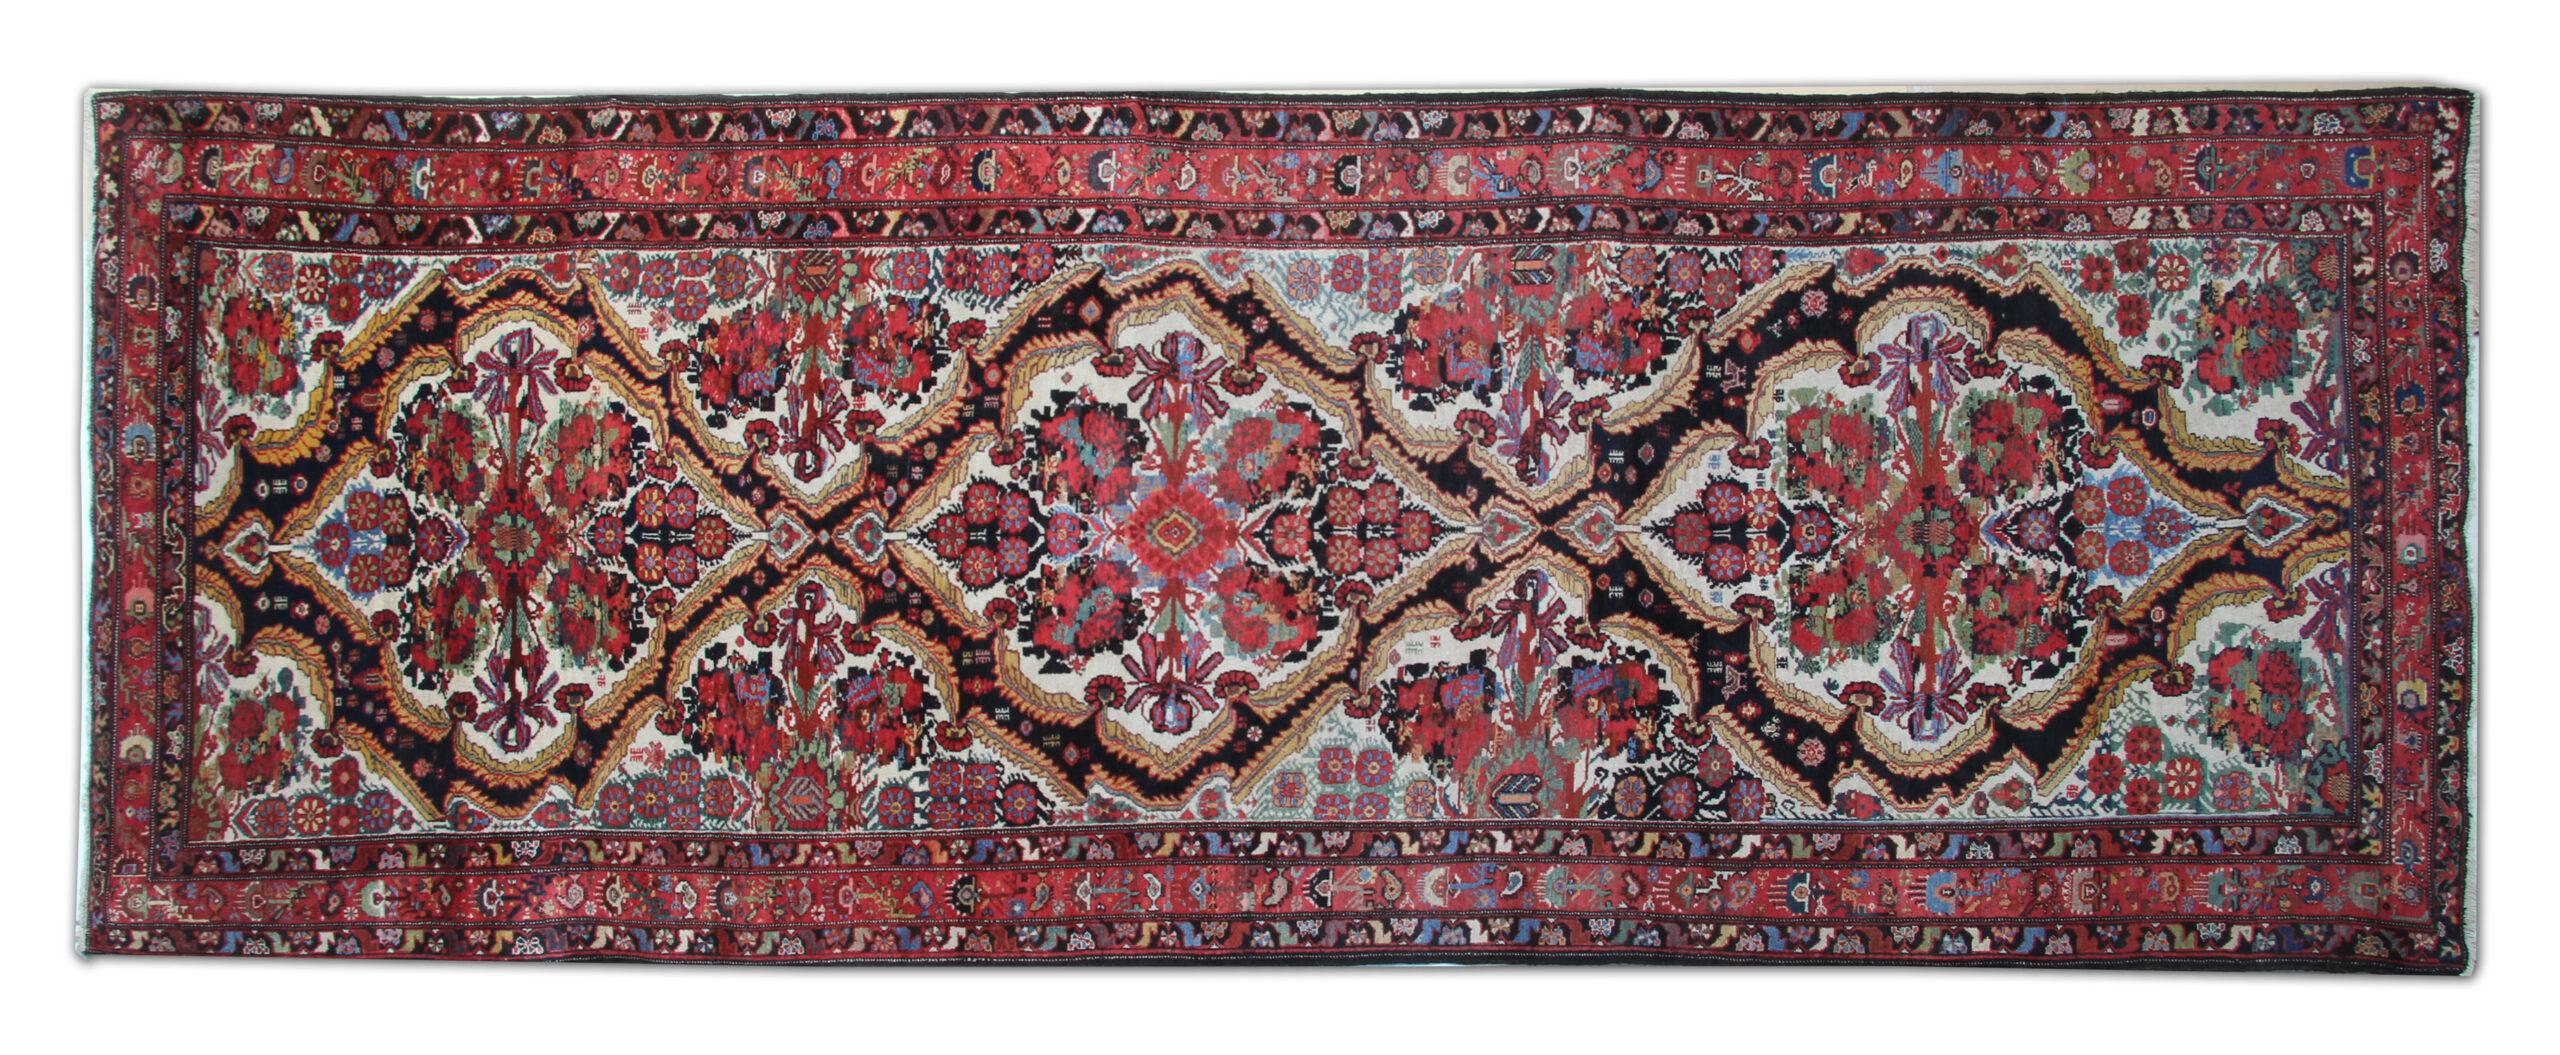 This is a beautiful example of the 19th-century antique rug hand-knotted in Iran. Featuring a floral botanical central design hand-knotted with handspun wool and cotton. The vibrant colours have been dyed using vegetable dyes, and rich reds and